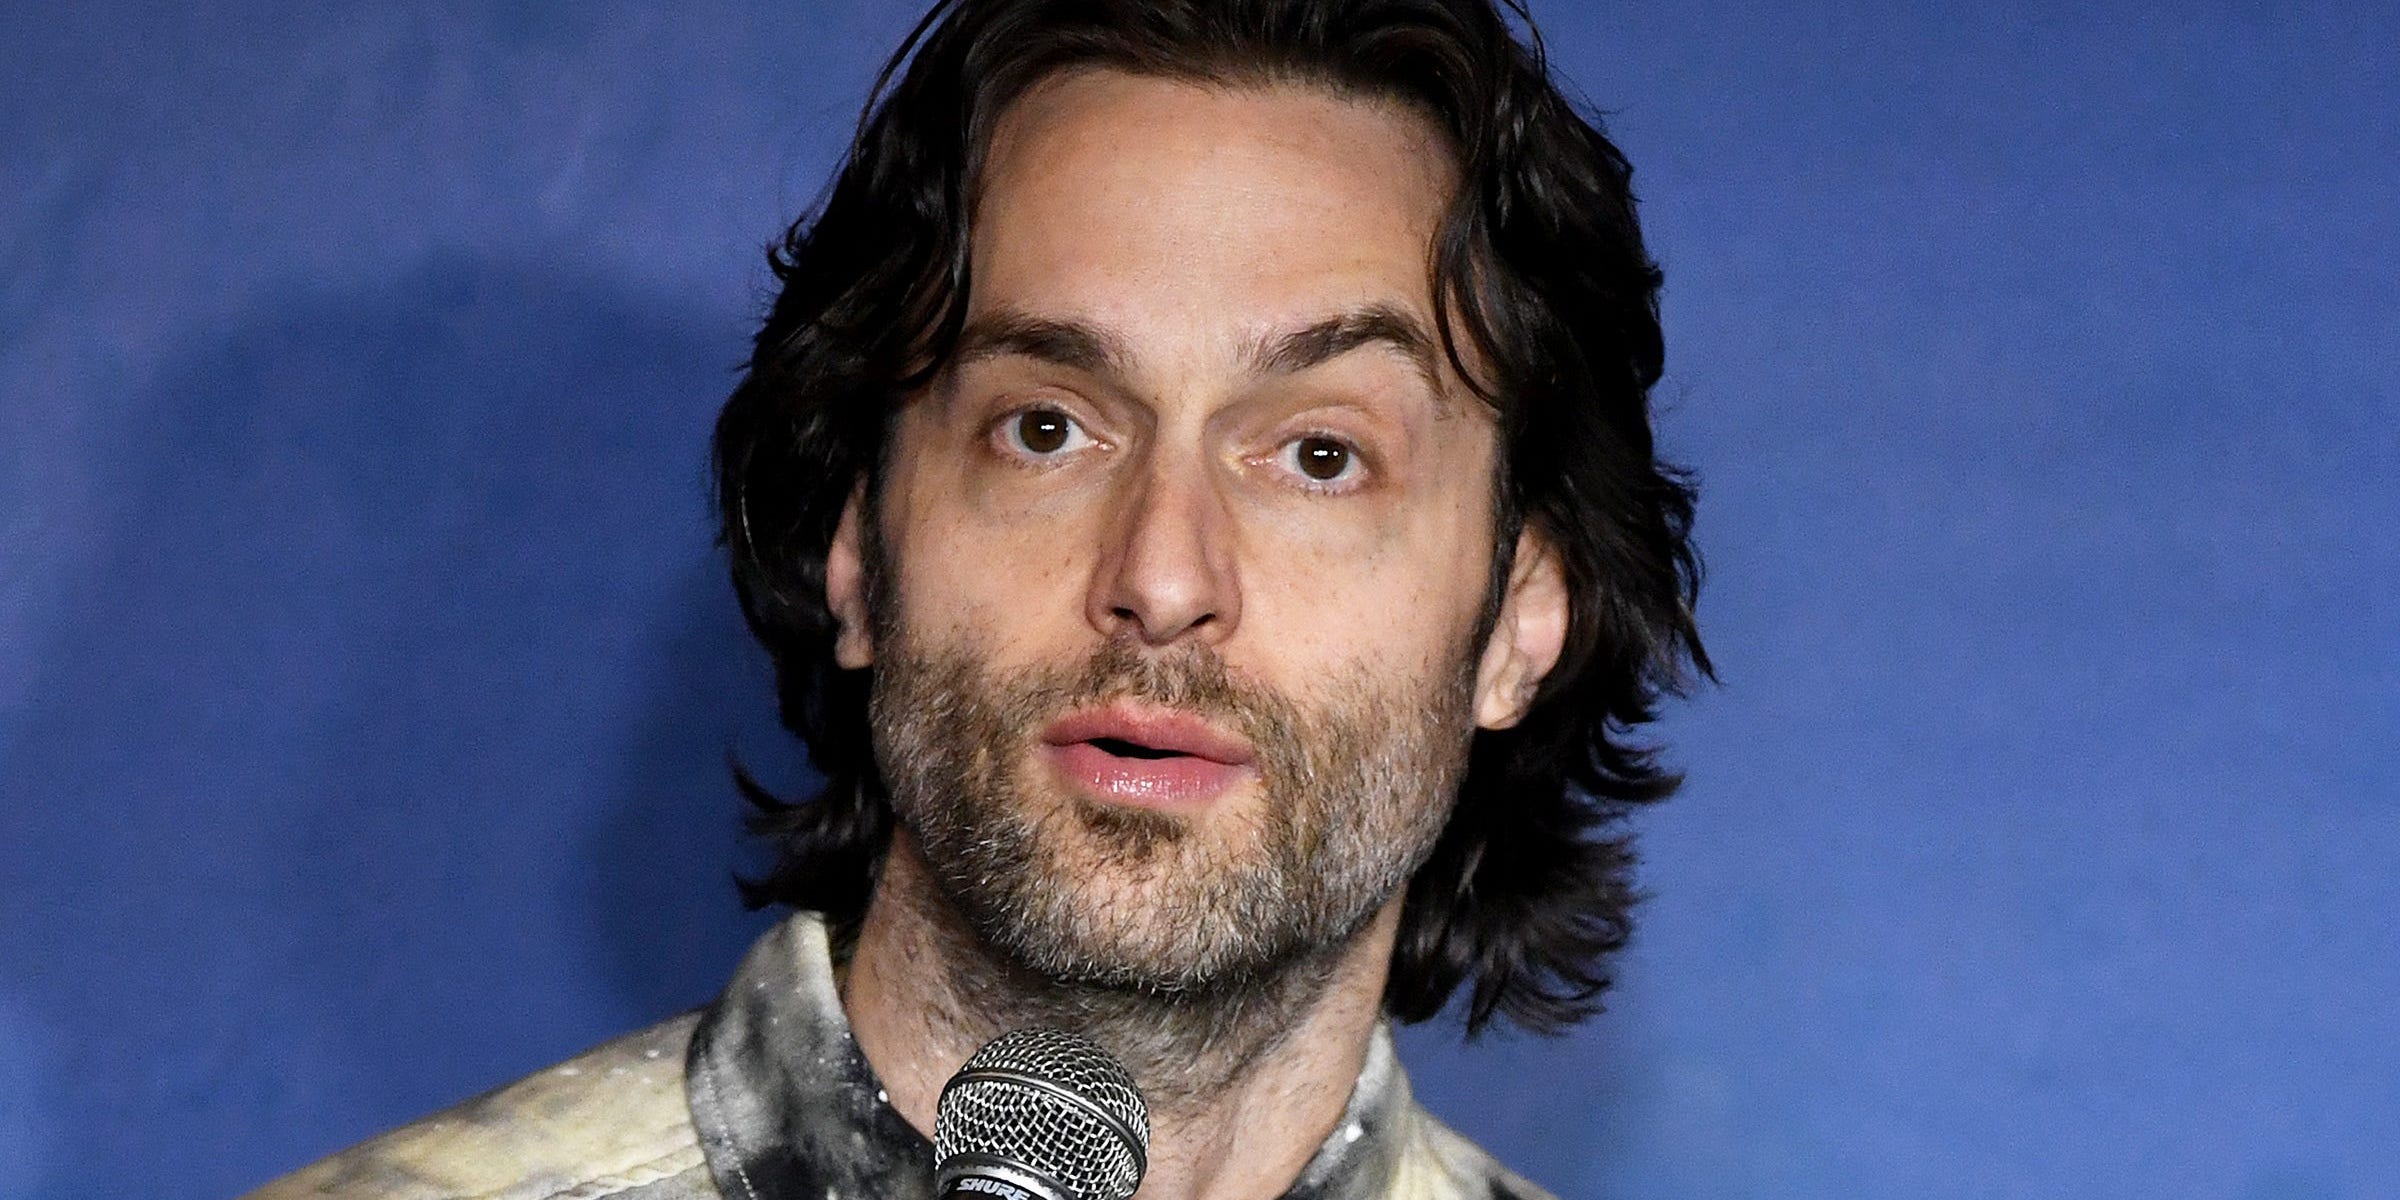 Chris D'Elia says he has 'a problem' as he breaks his silence 8 months